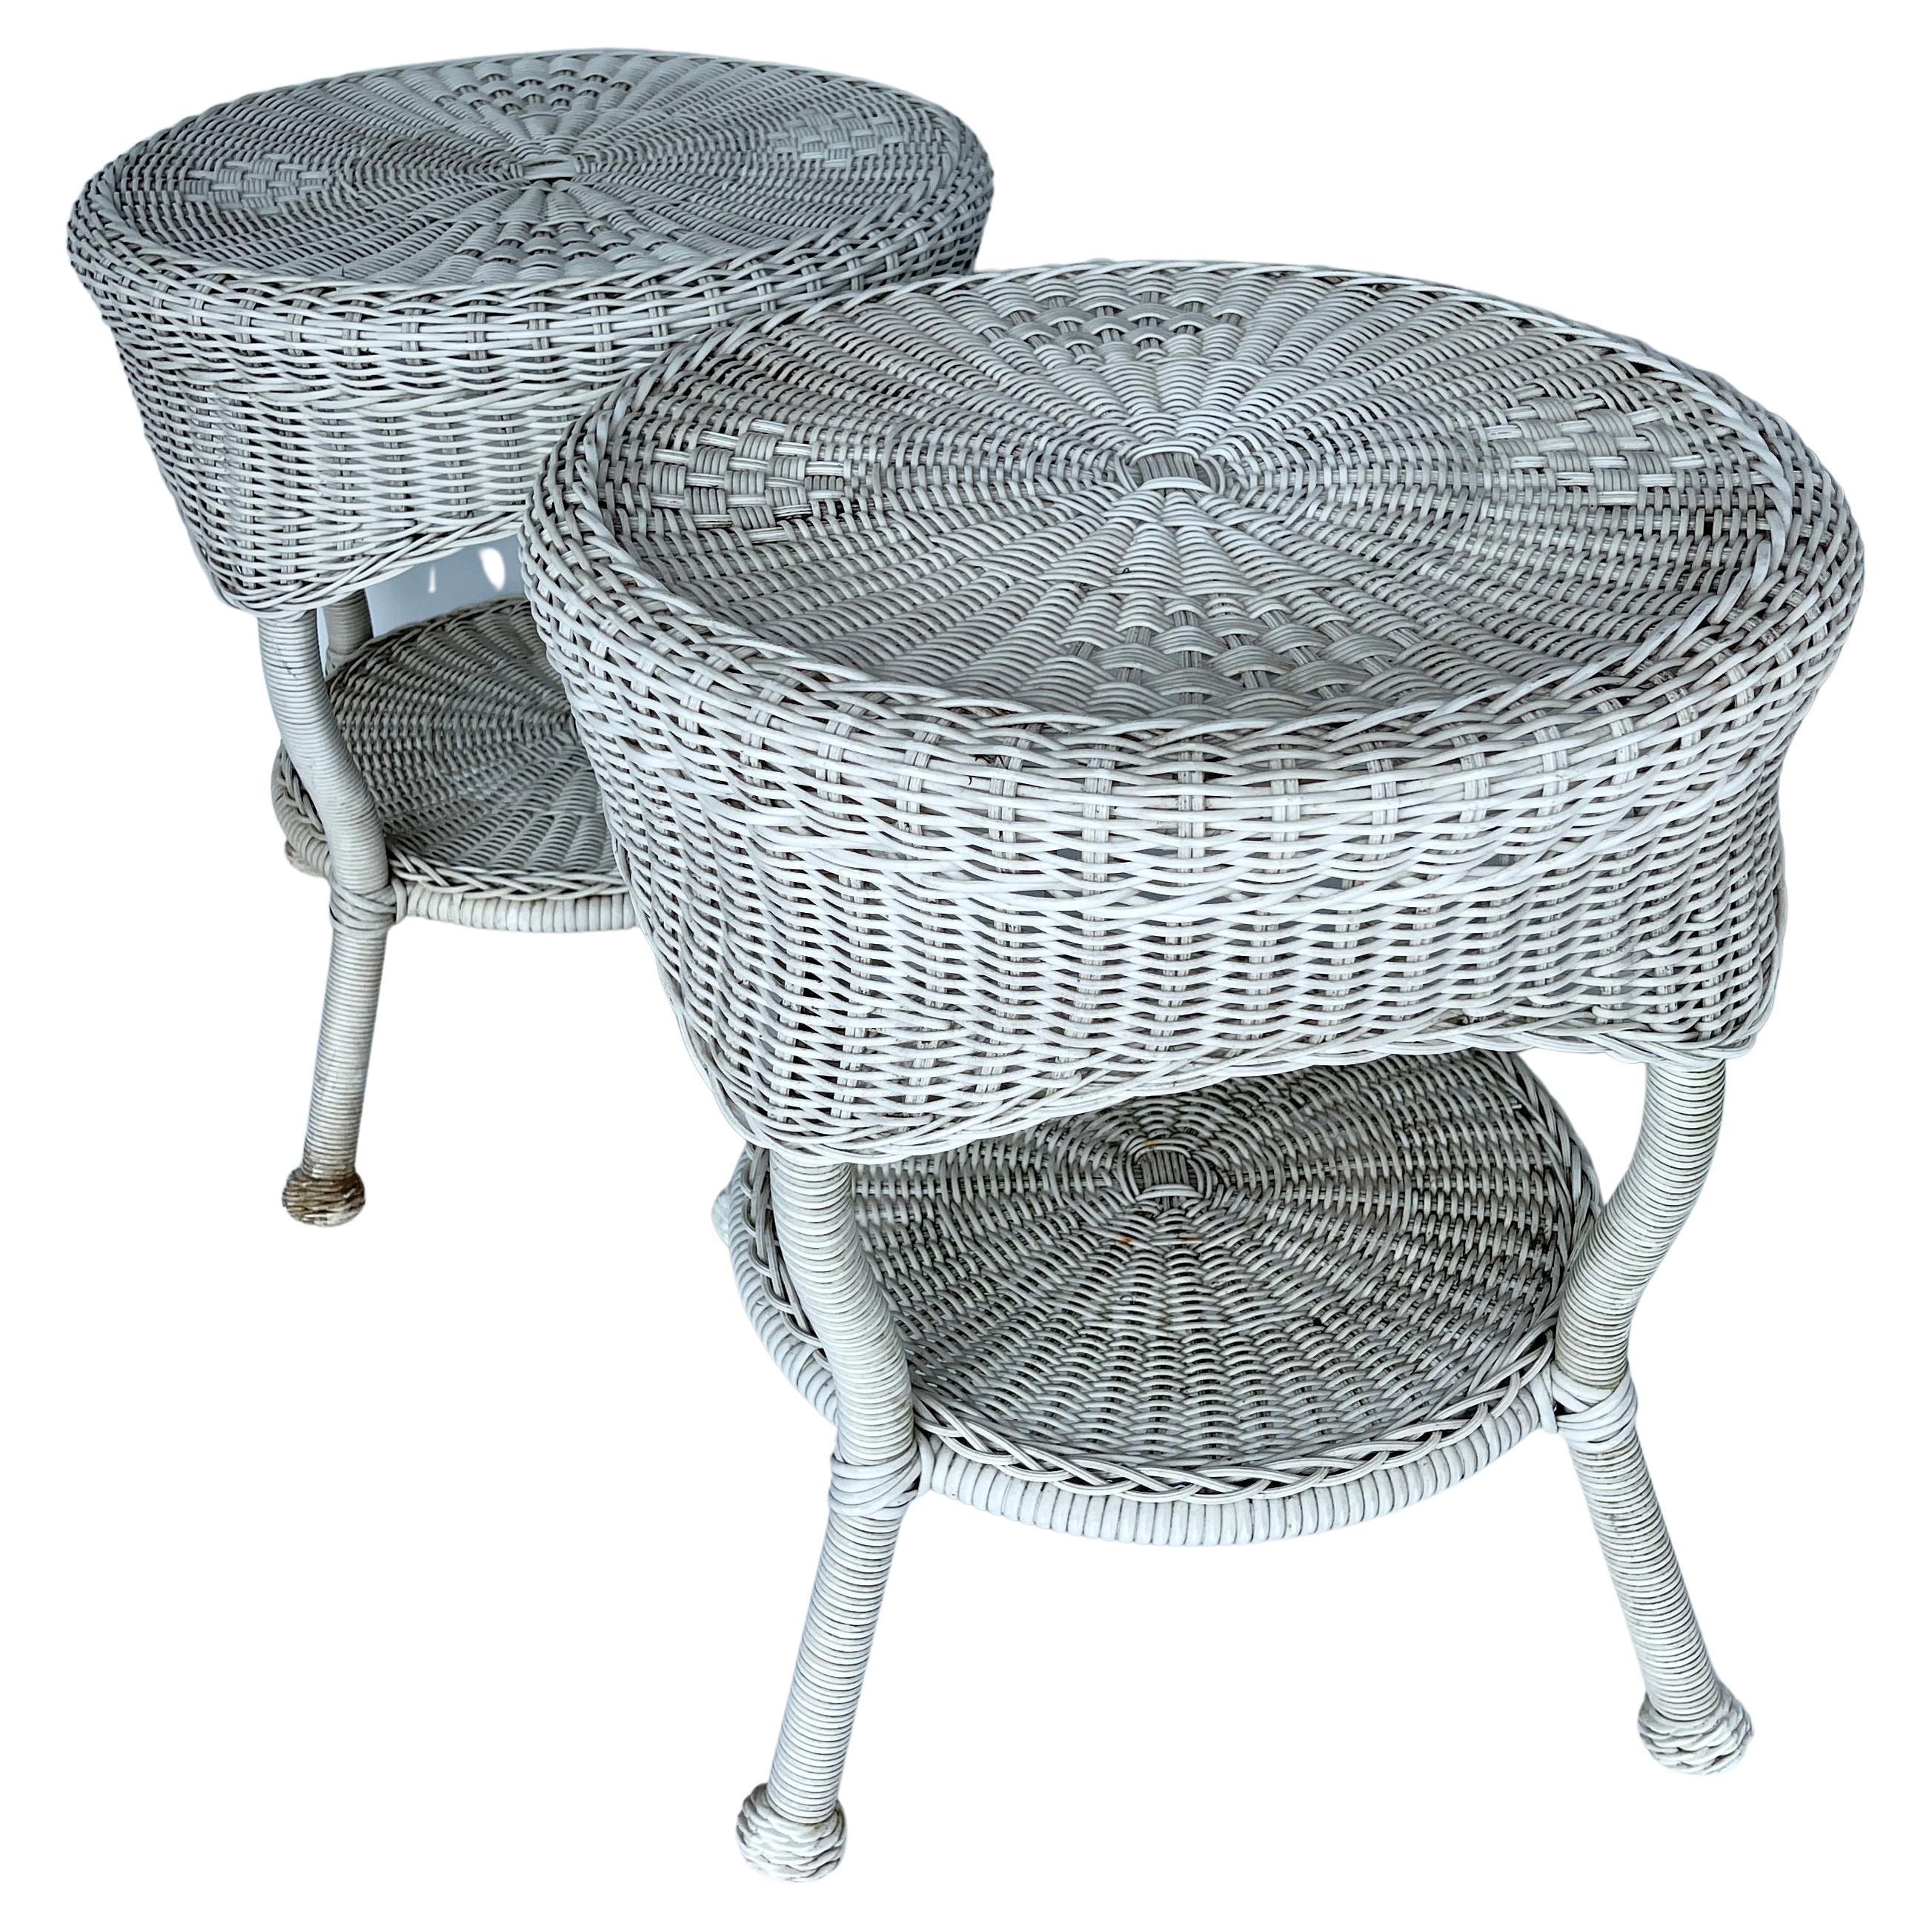 Woven Pair of White Faux Wicker Side Tables